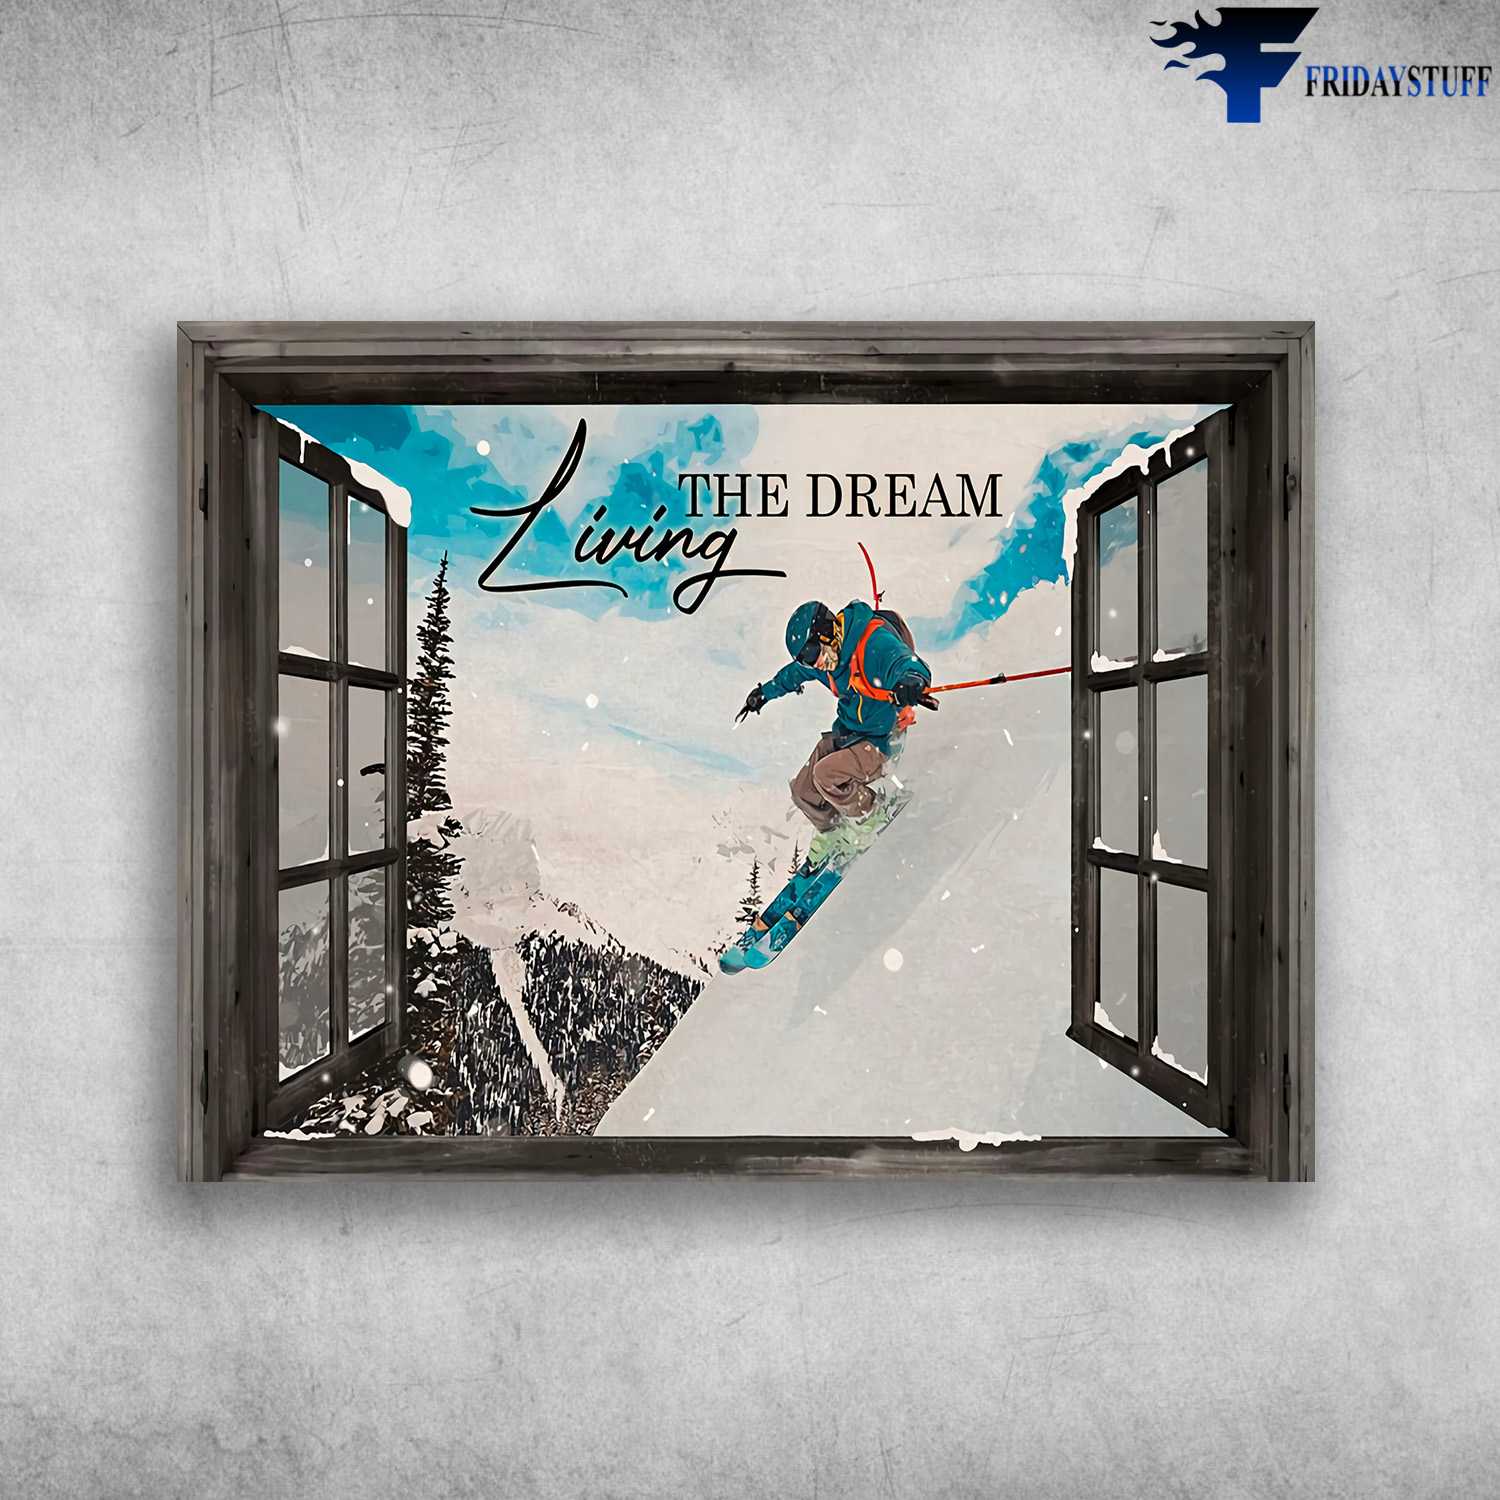 Skiing Man, Skiing Lover, Window Poster, Living The Dream